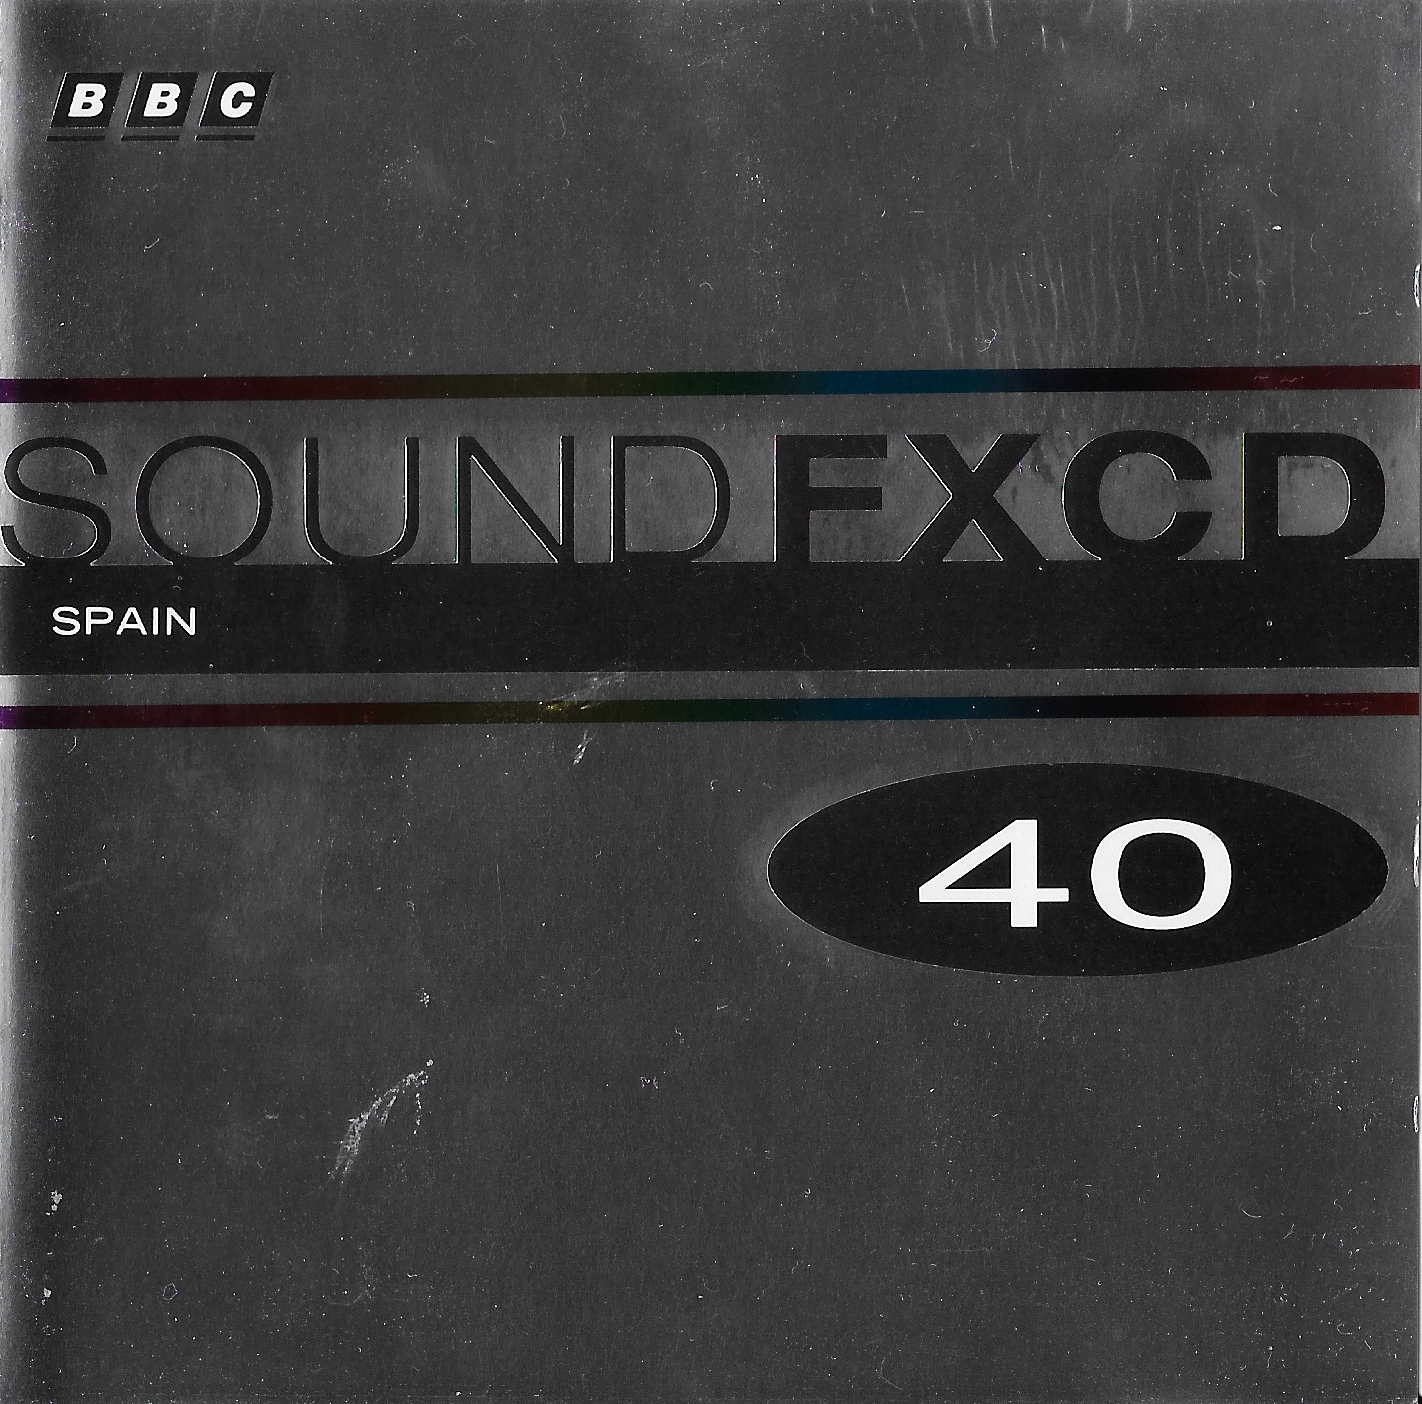 Picture of BBCCD SFX040 Spain by artist Various from the BBC cds - Records and Tapes library